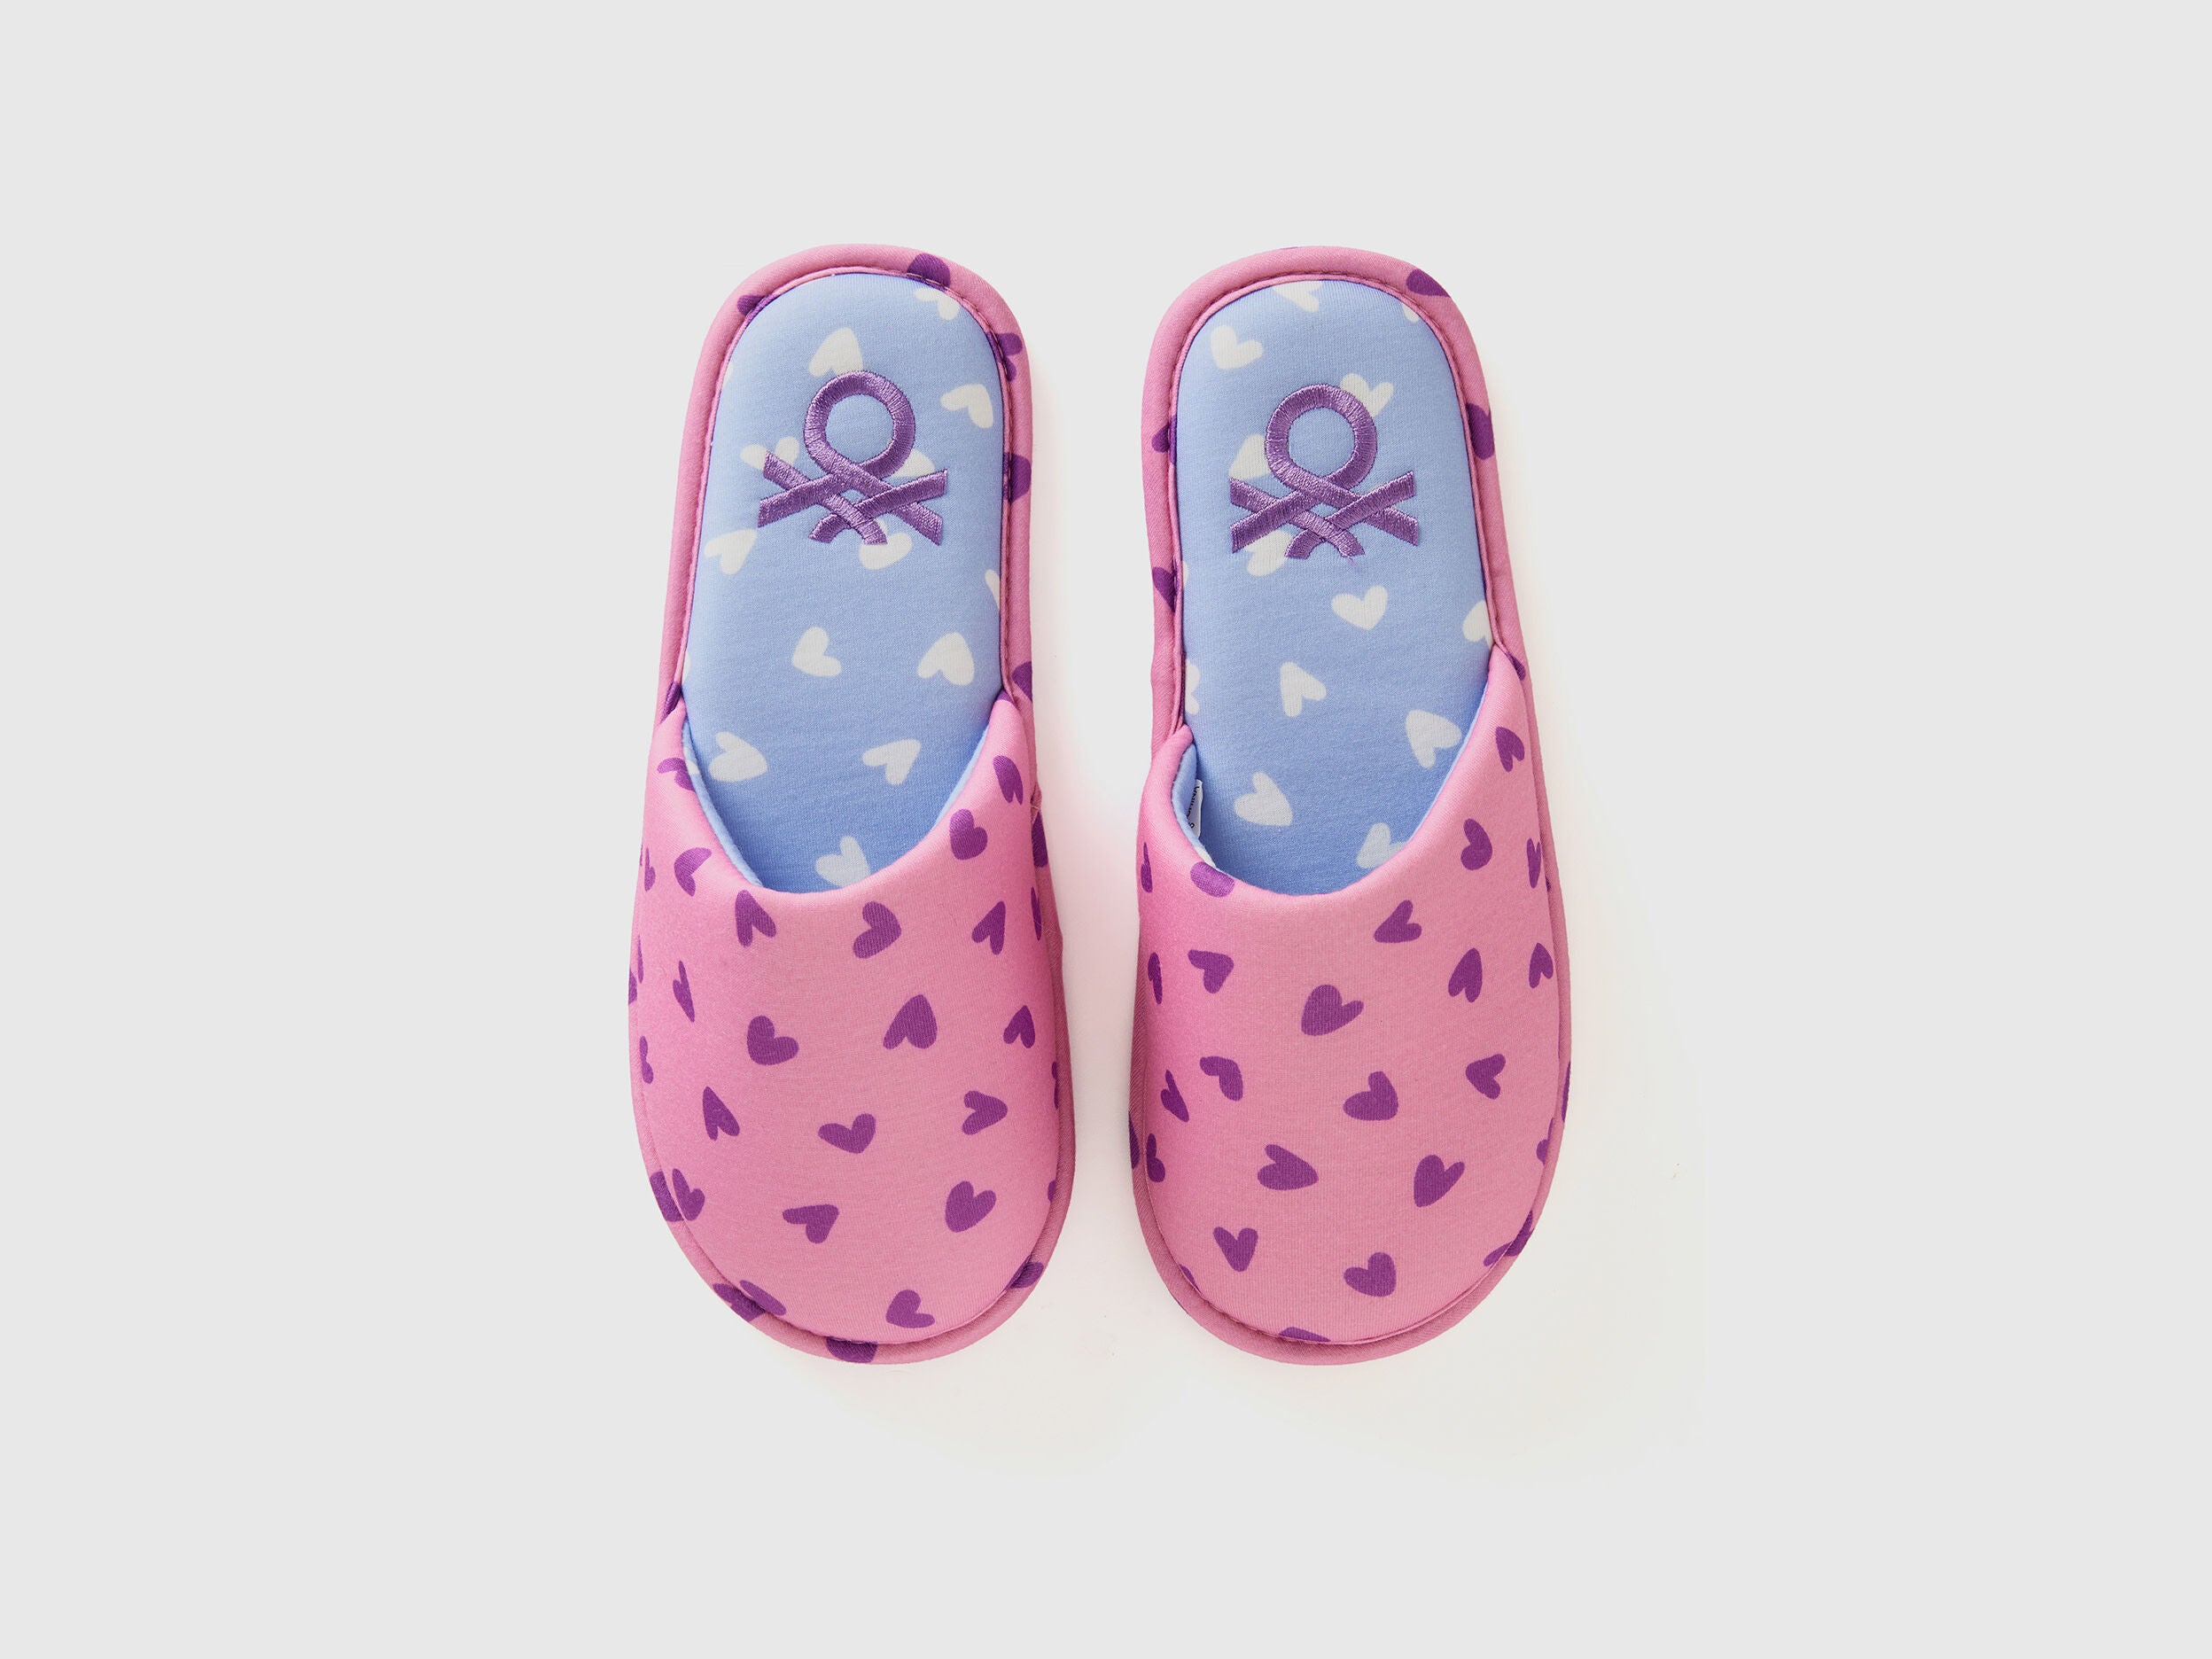 Heart-Patterned Slippers